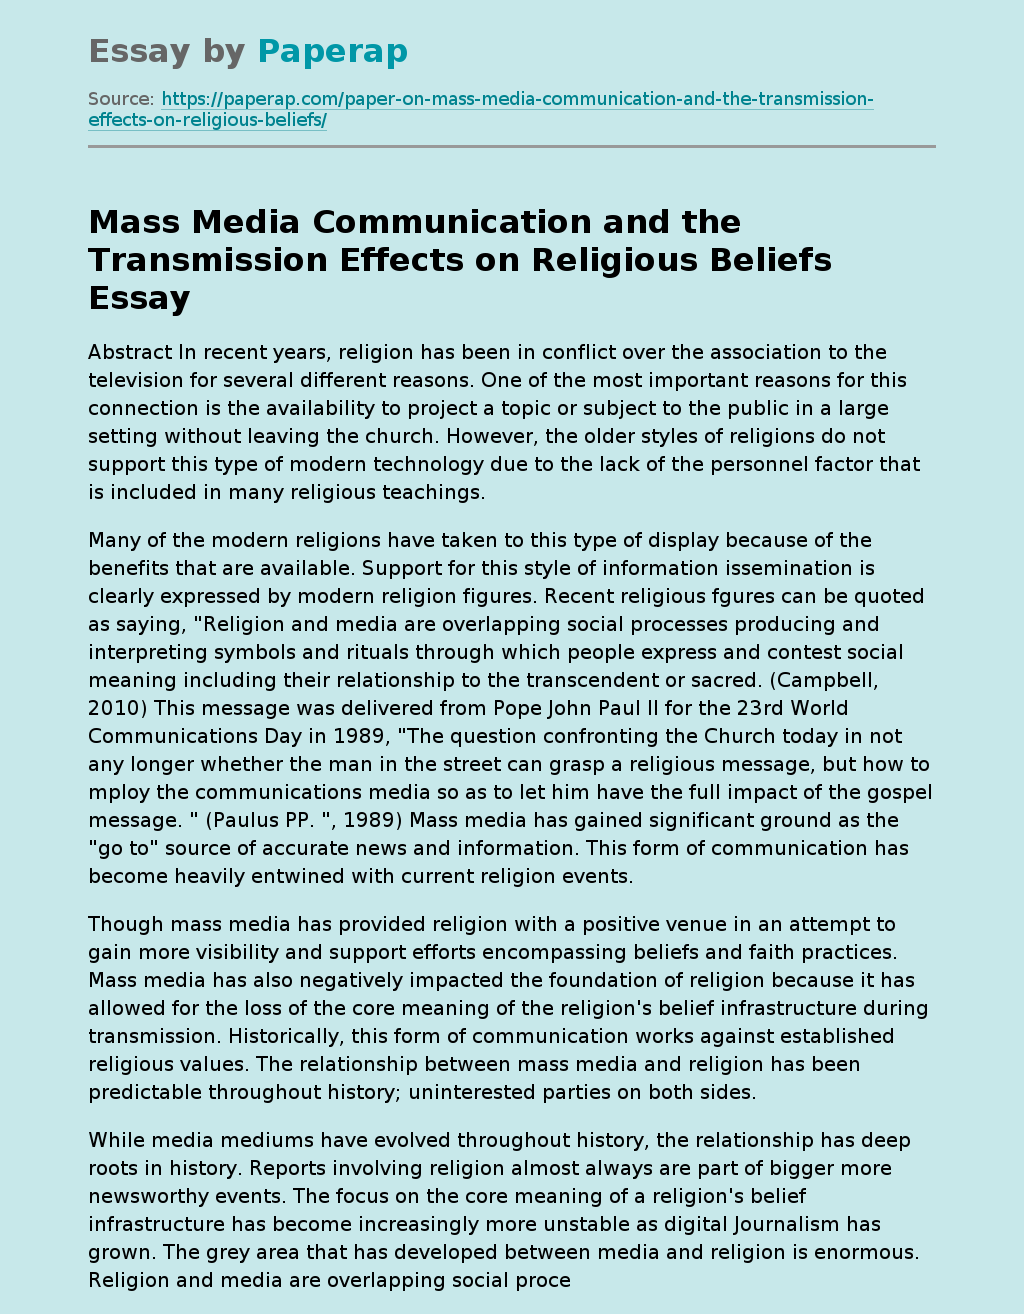 Mass Media Communication and the Transmission Effects on Religious Beliefs